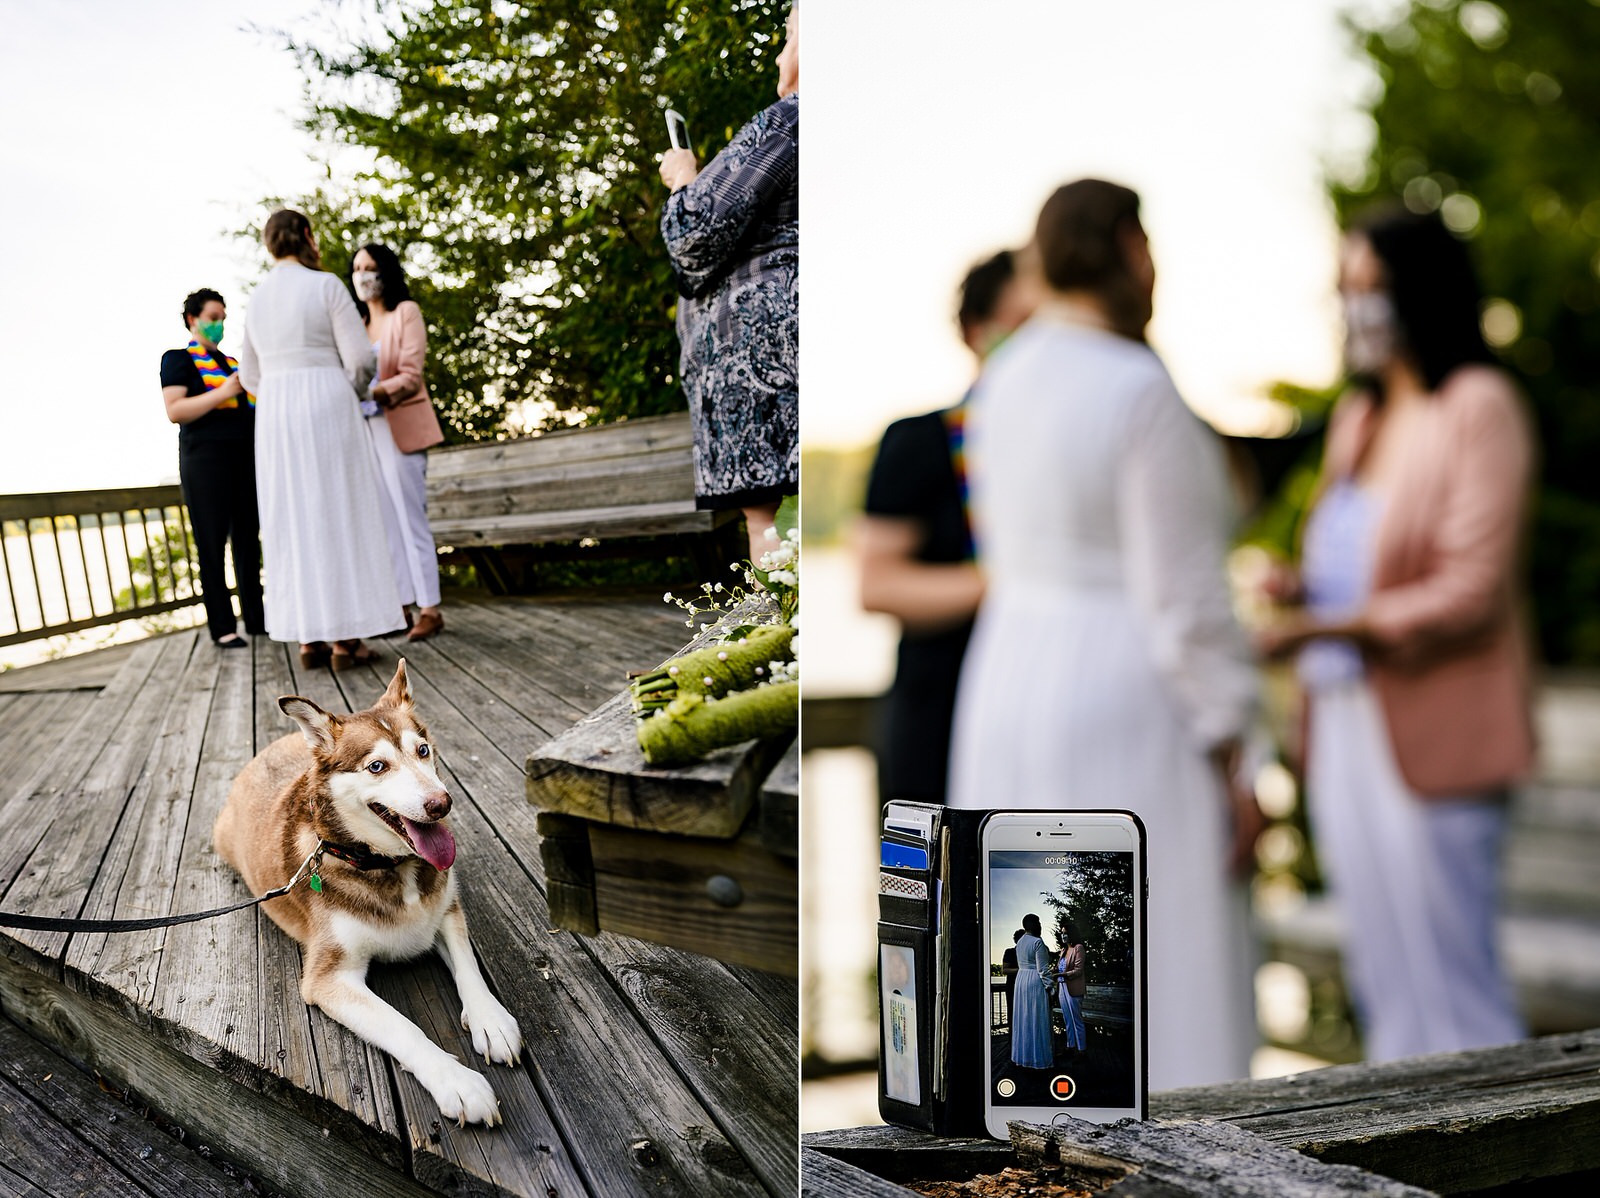 The brides' dog rests next to the small, intimate wedding ceremony